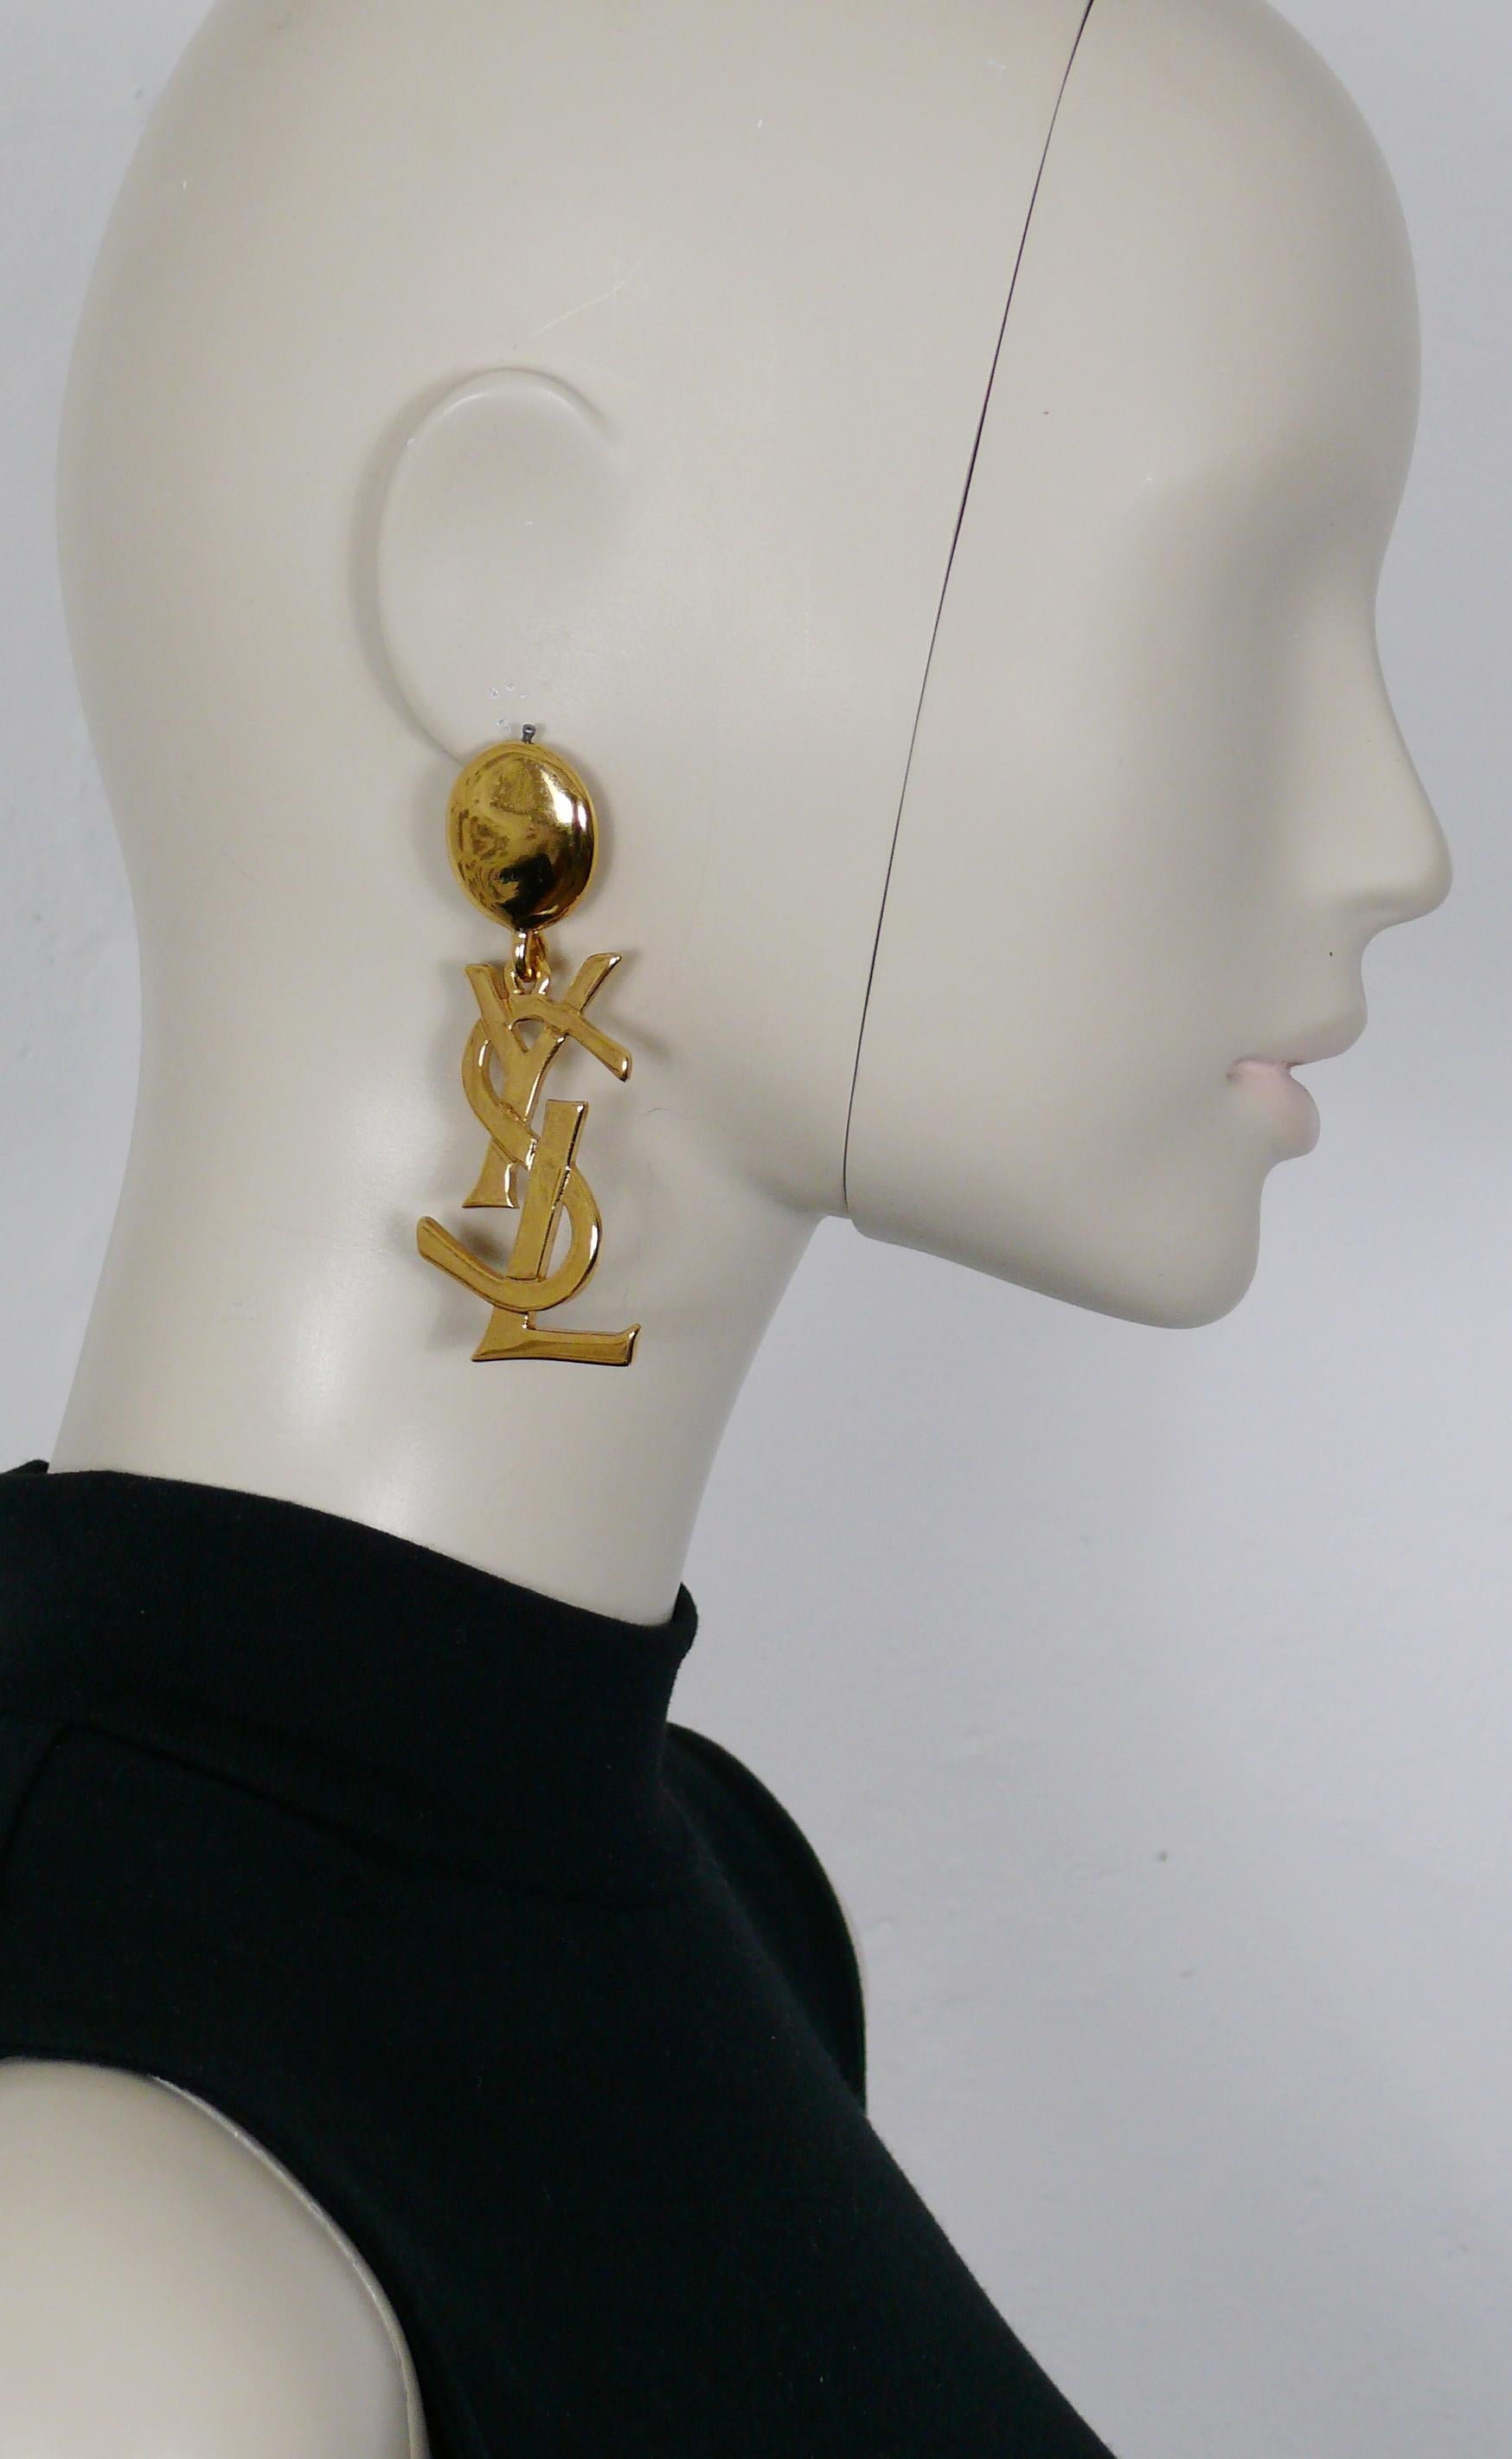 YVES SAINT LAURENT vintage massive gold toned iconic dangling earrings (clip on) featuring the YSL logo.

Embossed YSL Made in France.

Indicative measurements : length approx. 8.3 cm (approx. 3.27 inches) / max. width approx. 2.7 cm (1.06